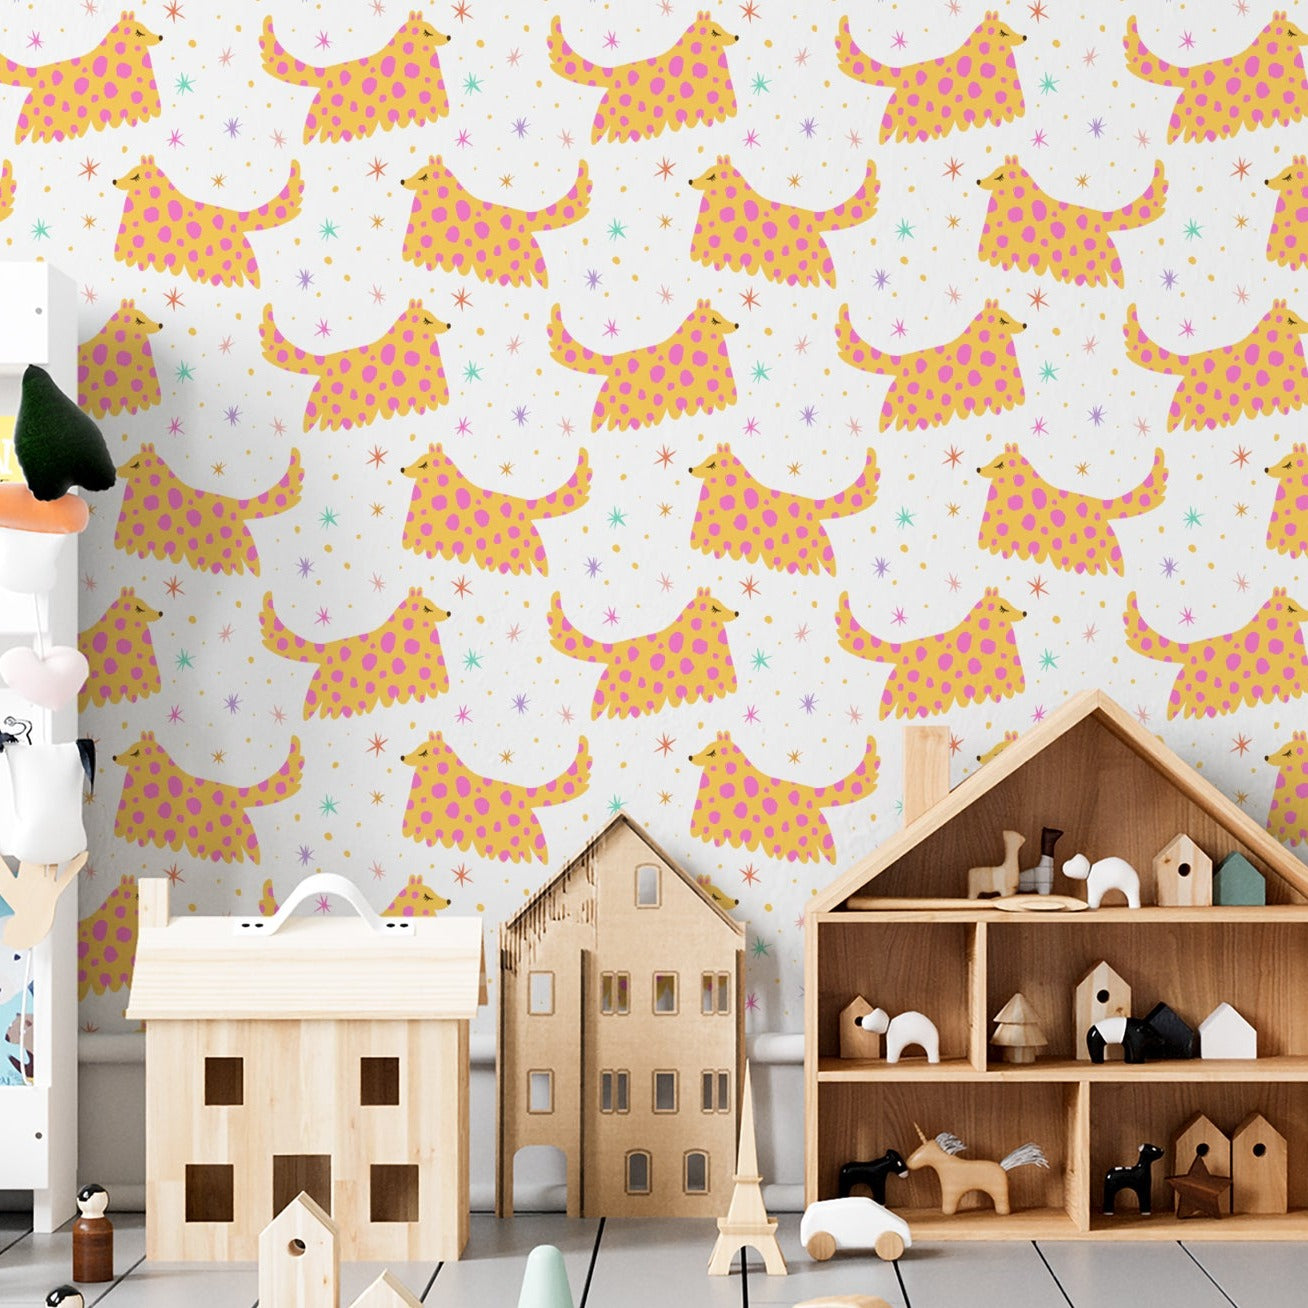 A children's playroom decorated with 'Dog Wallpaper 35,' showcasing walls covered in a repeating pattern of whimsical, spotted dogs in pink and yellow on a white background, complemented by a variety of children's toys and books